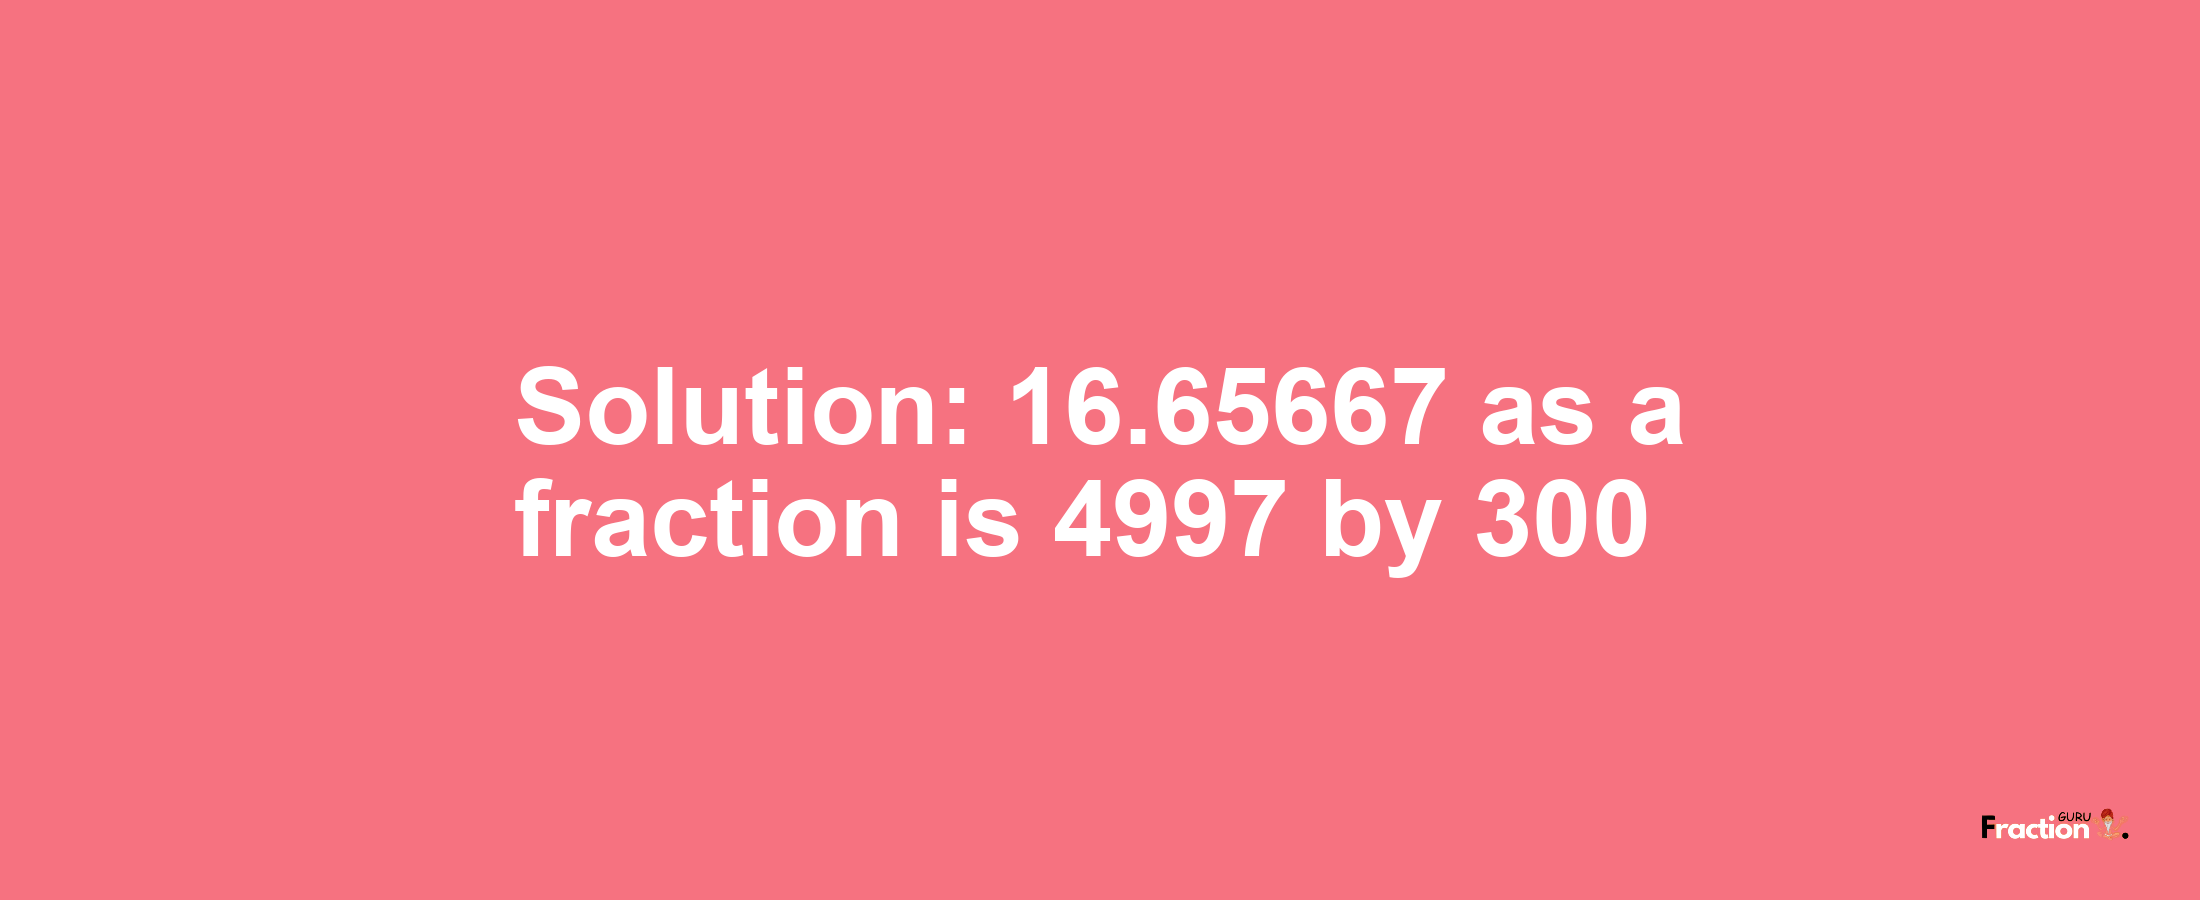 Solution:16.65667 as a fraction is 4997/300